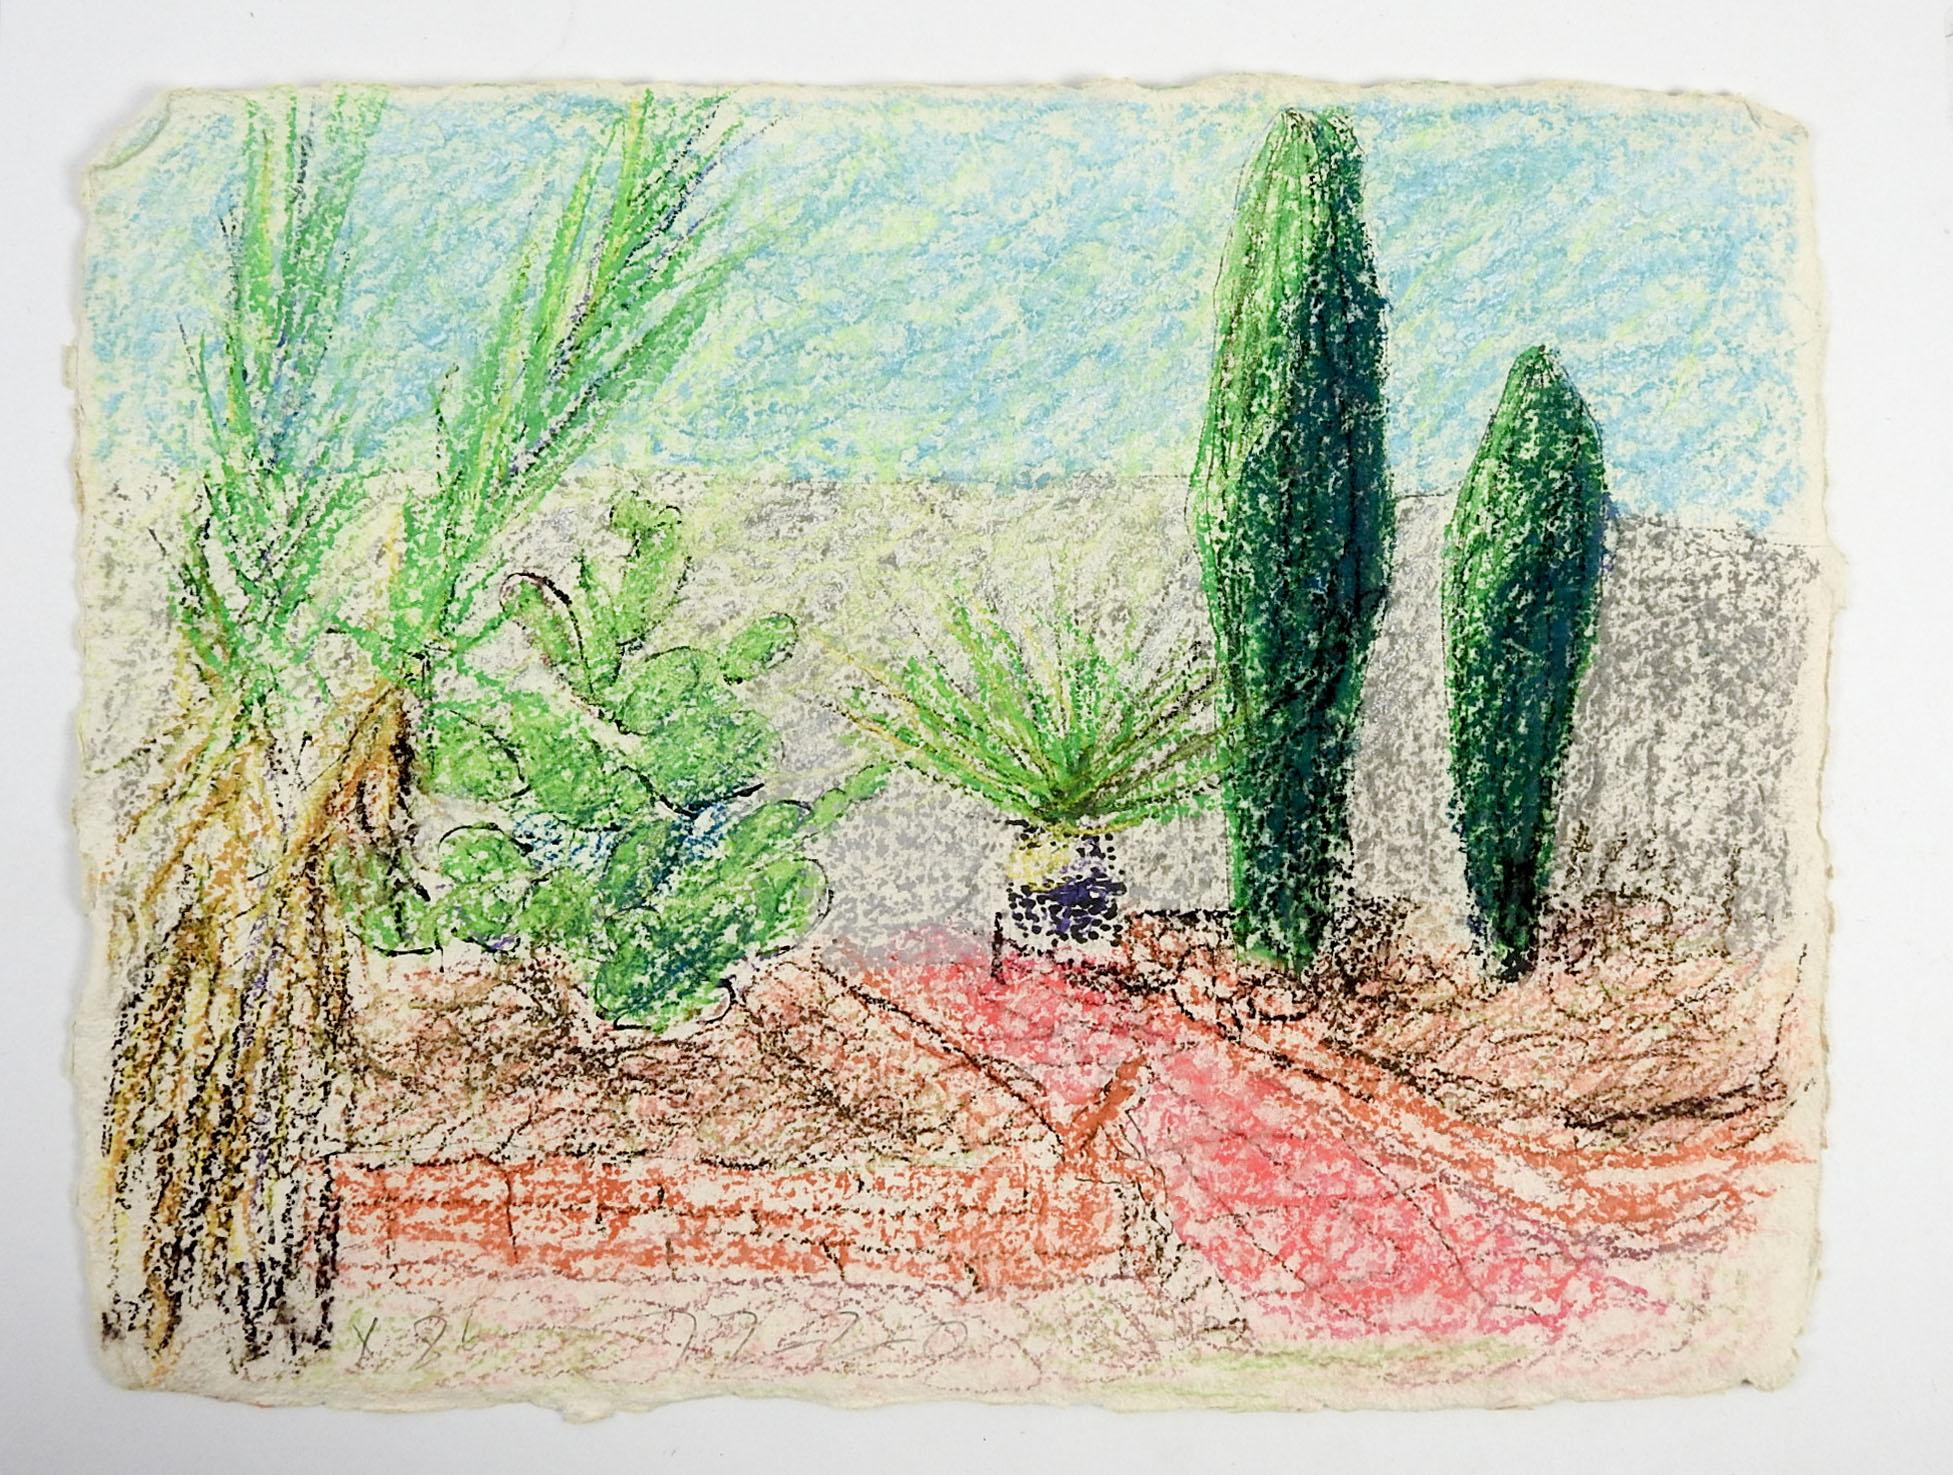 Colored pencil drawing of desert foliage garden on heavy handmade paper by George Turner (1943-2014) American.  Signed and dated 1986 lower left corner. Unframed.